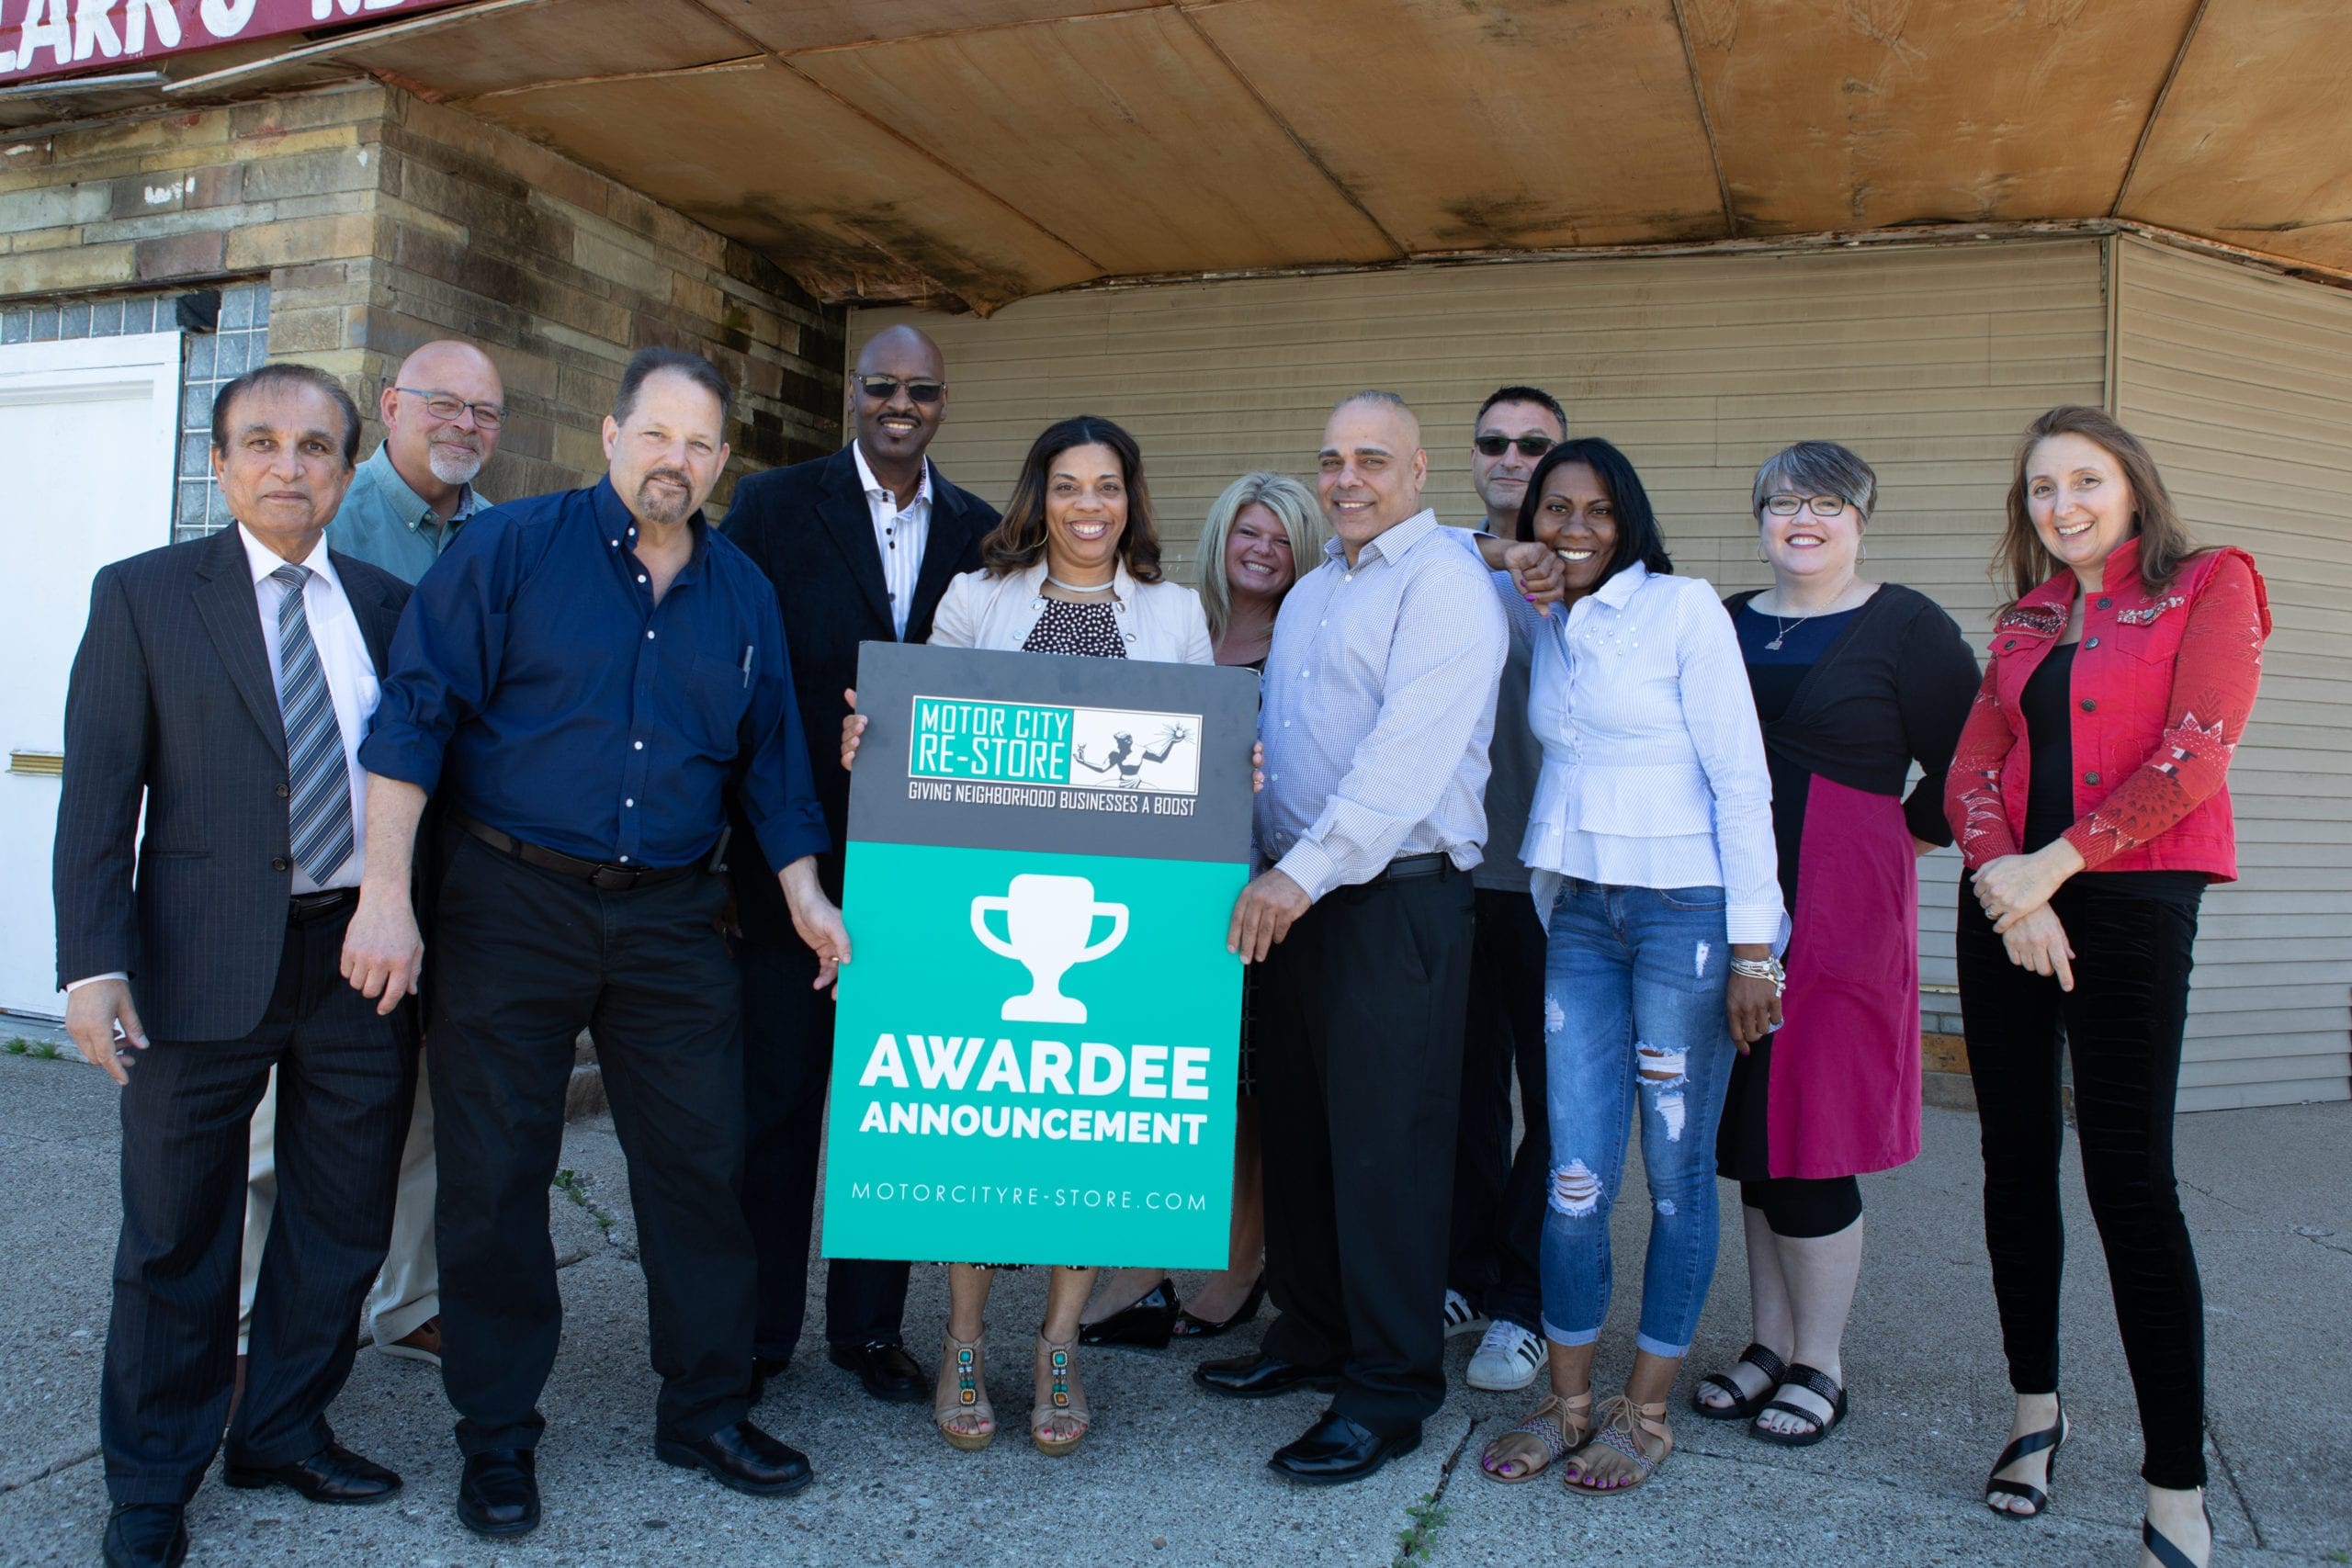 A group of people posing for a picture while holding up an awardee sign